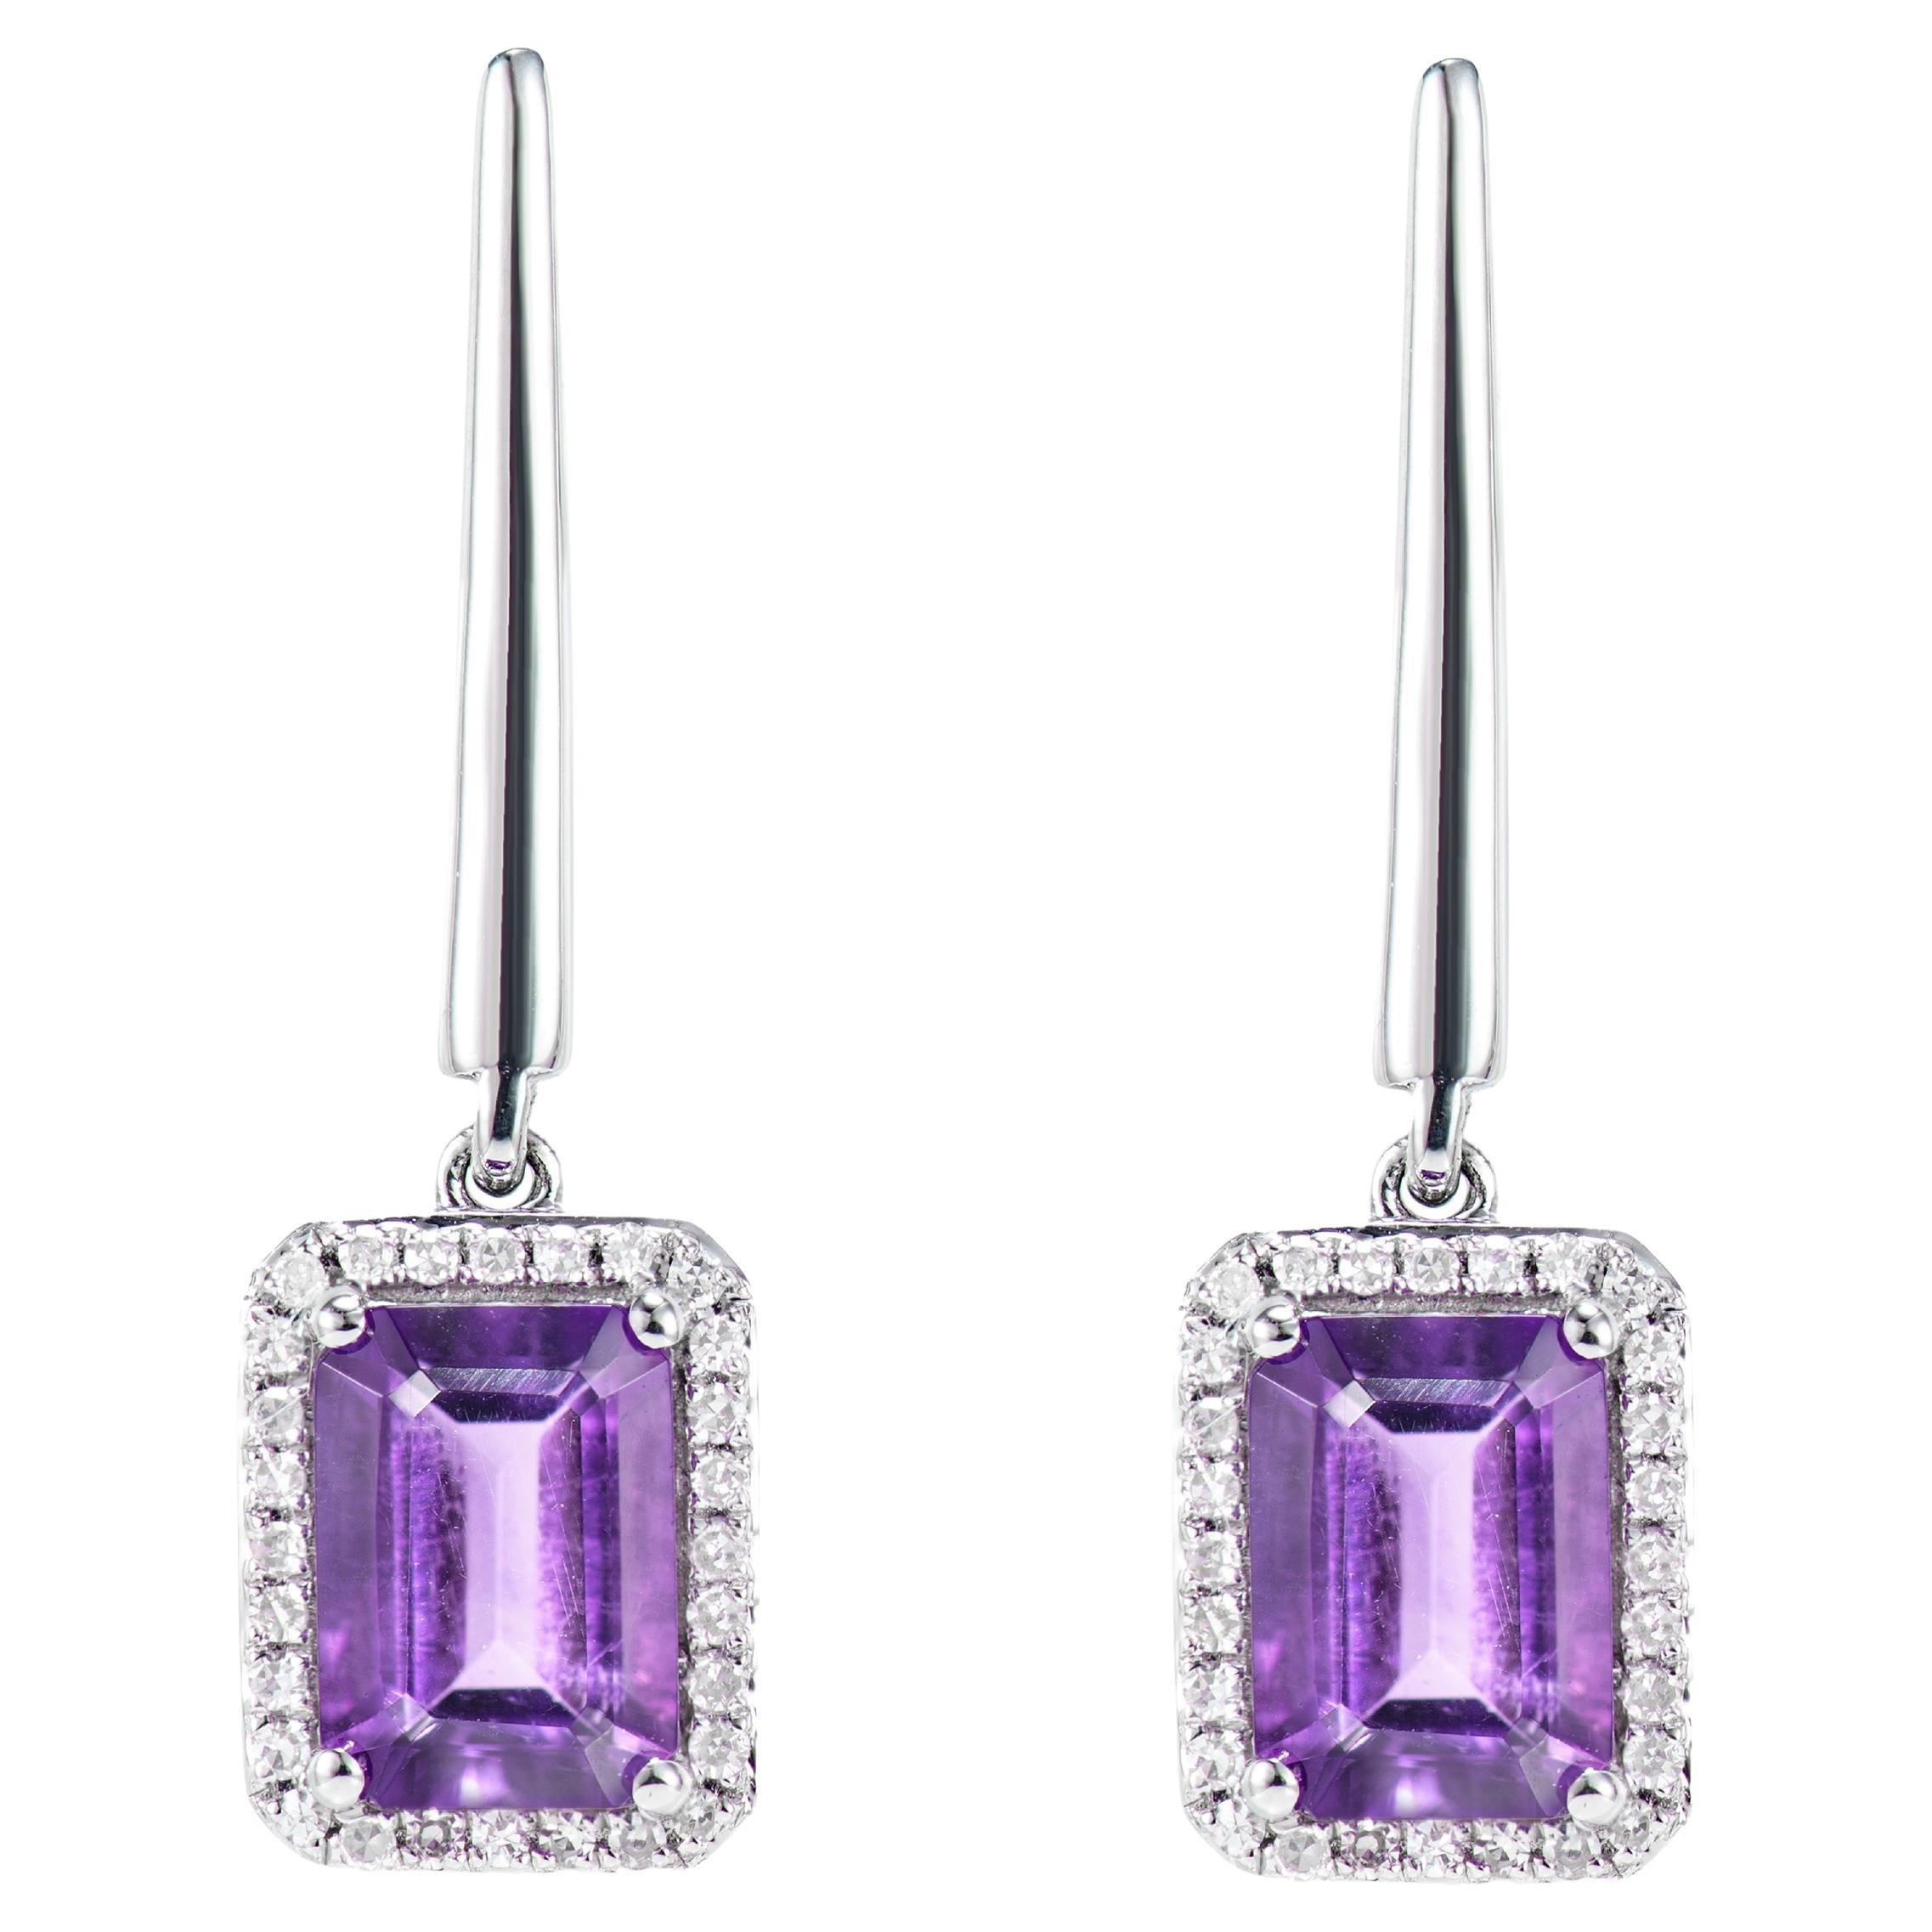 1.76 Carat Amethyst Drop Earrings in 18Karat White Gold with White Diamond. For Sale